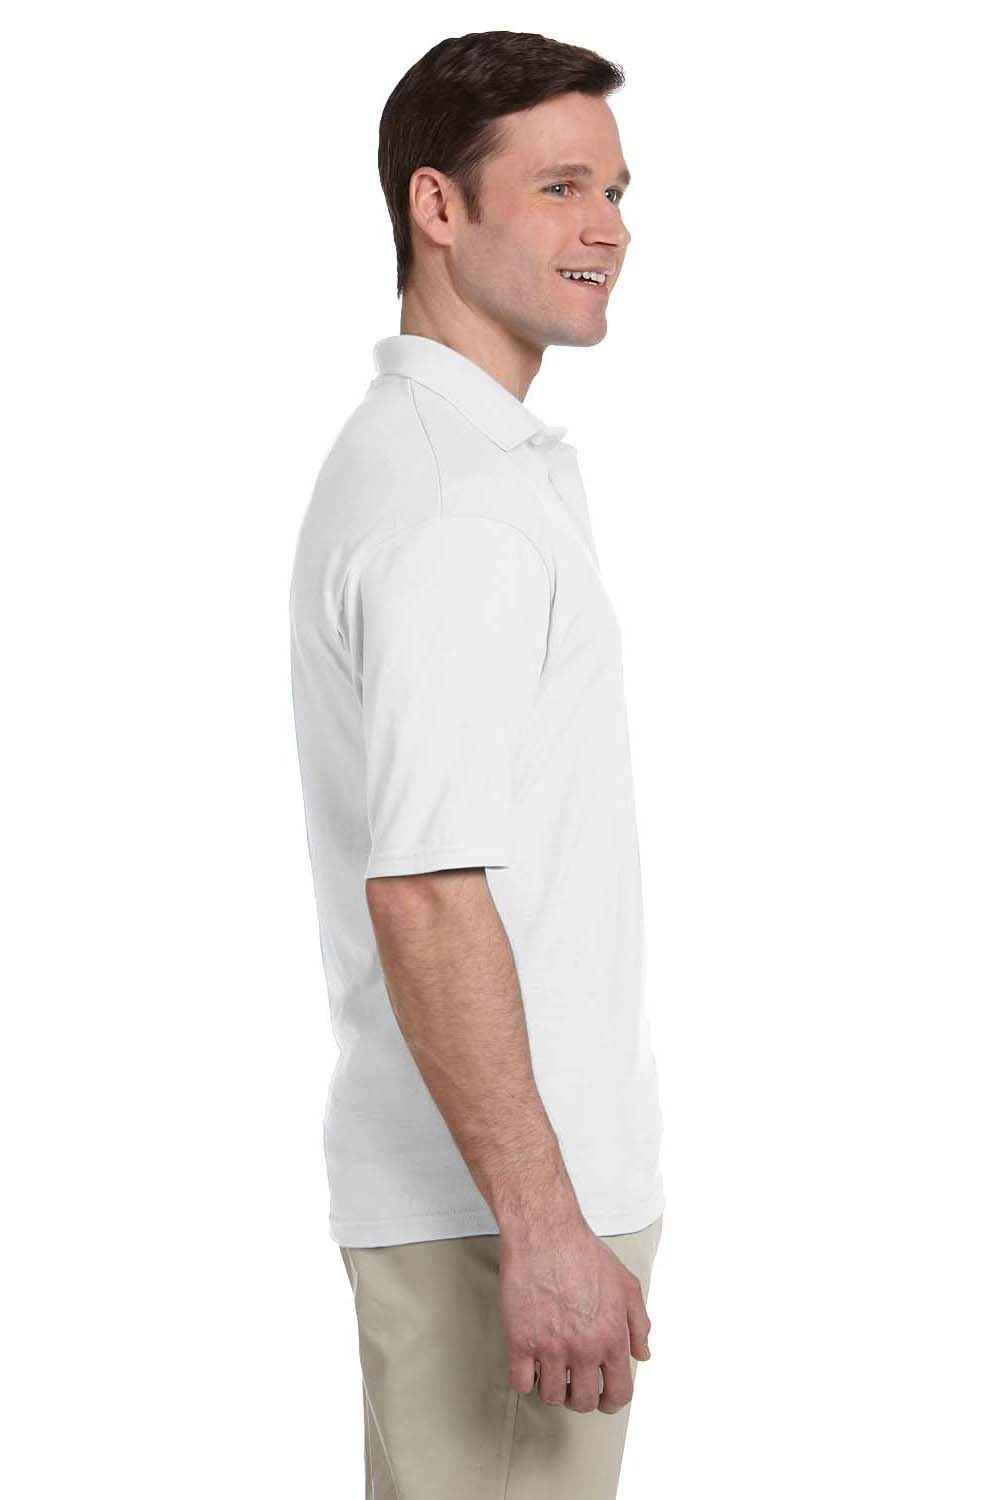 Jerzees 436P Mens SpotShield Stain Resistant Short Sleeve Polo Shirt w/ Pocket White Side